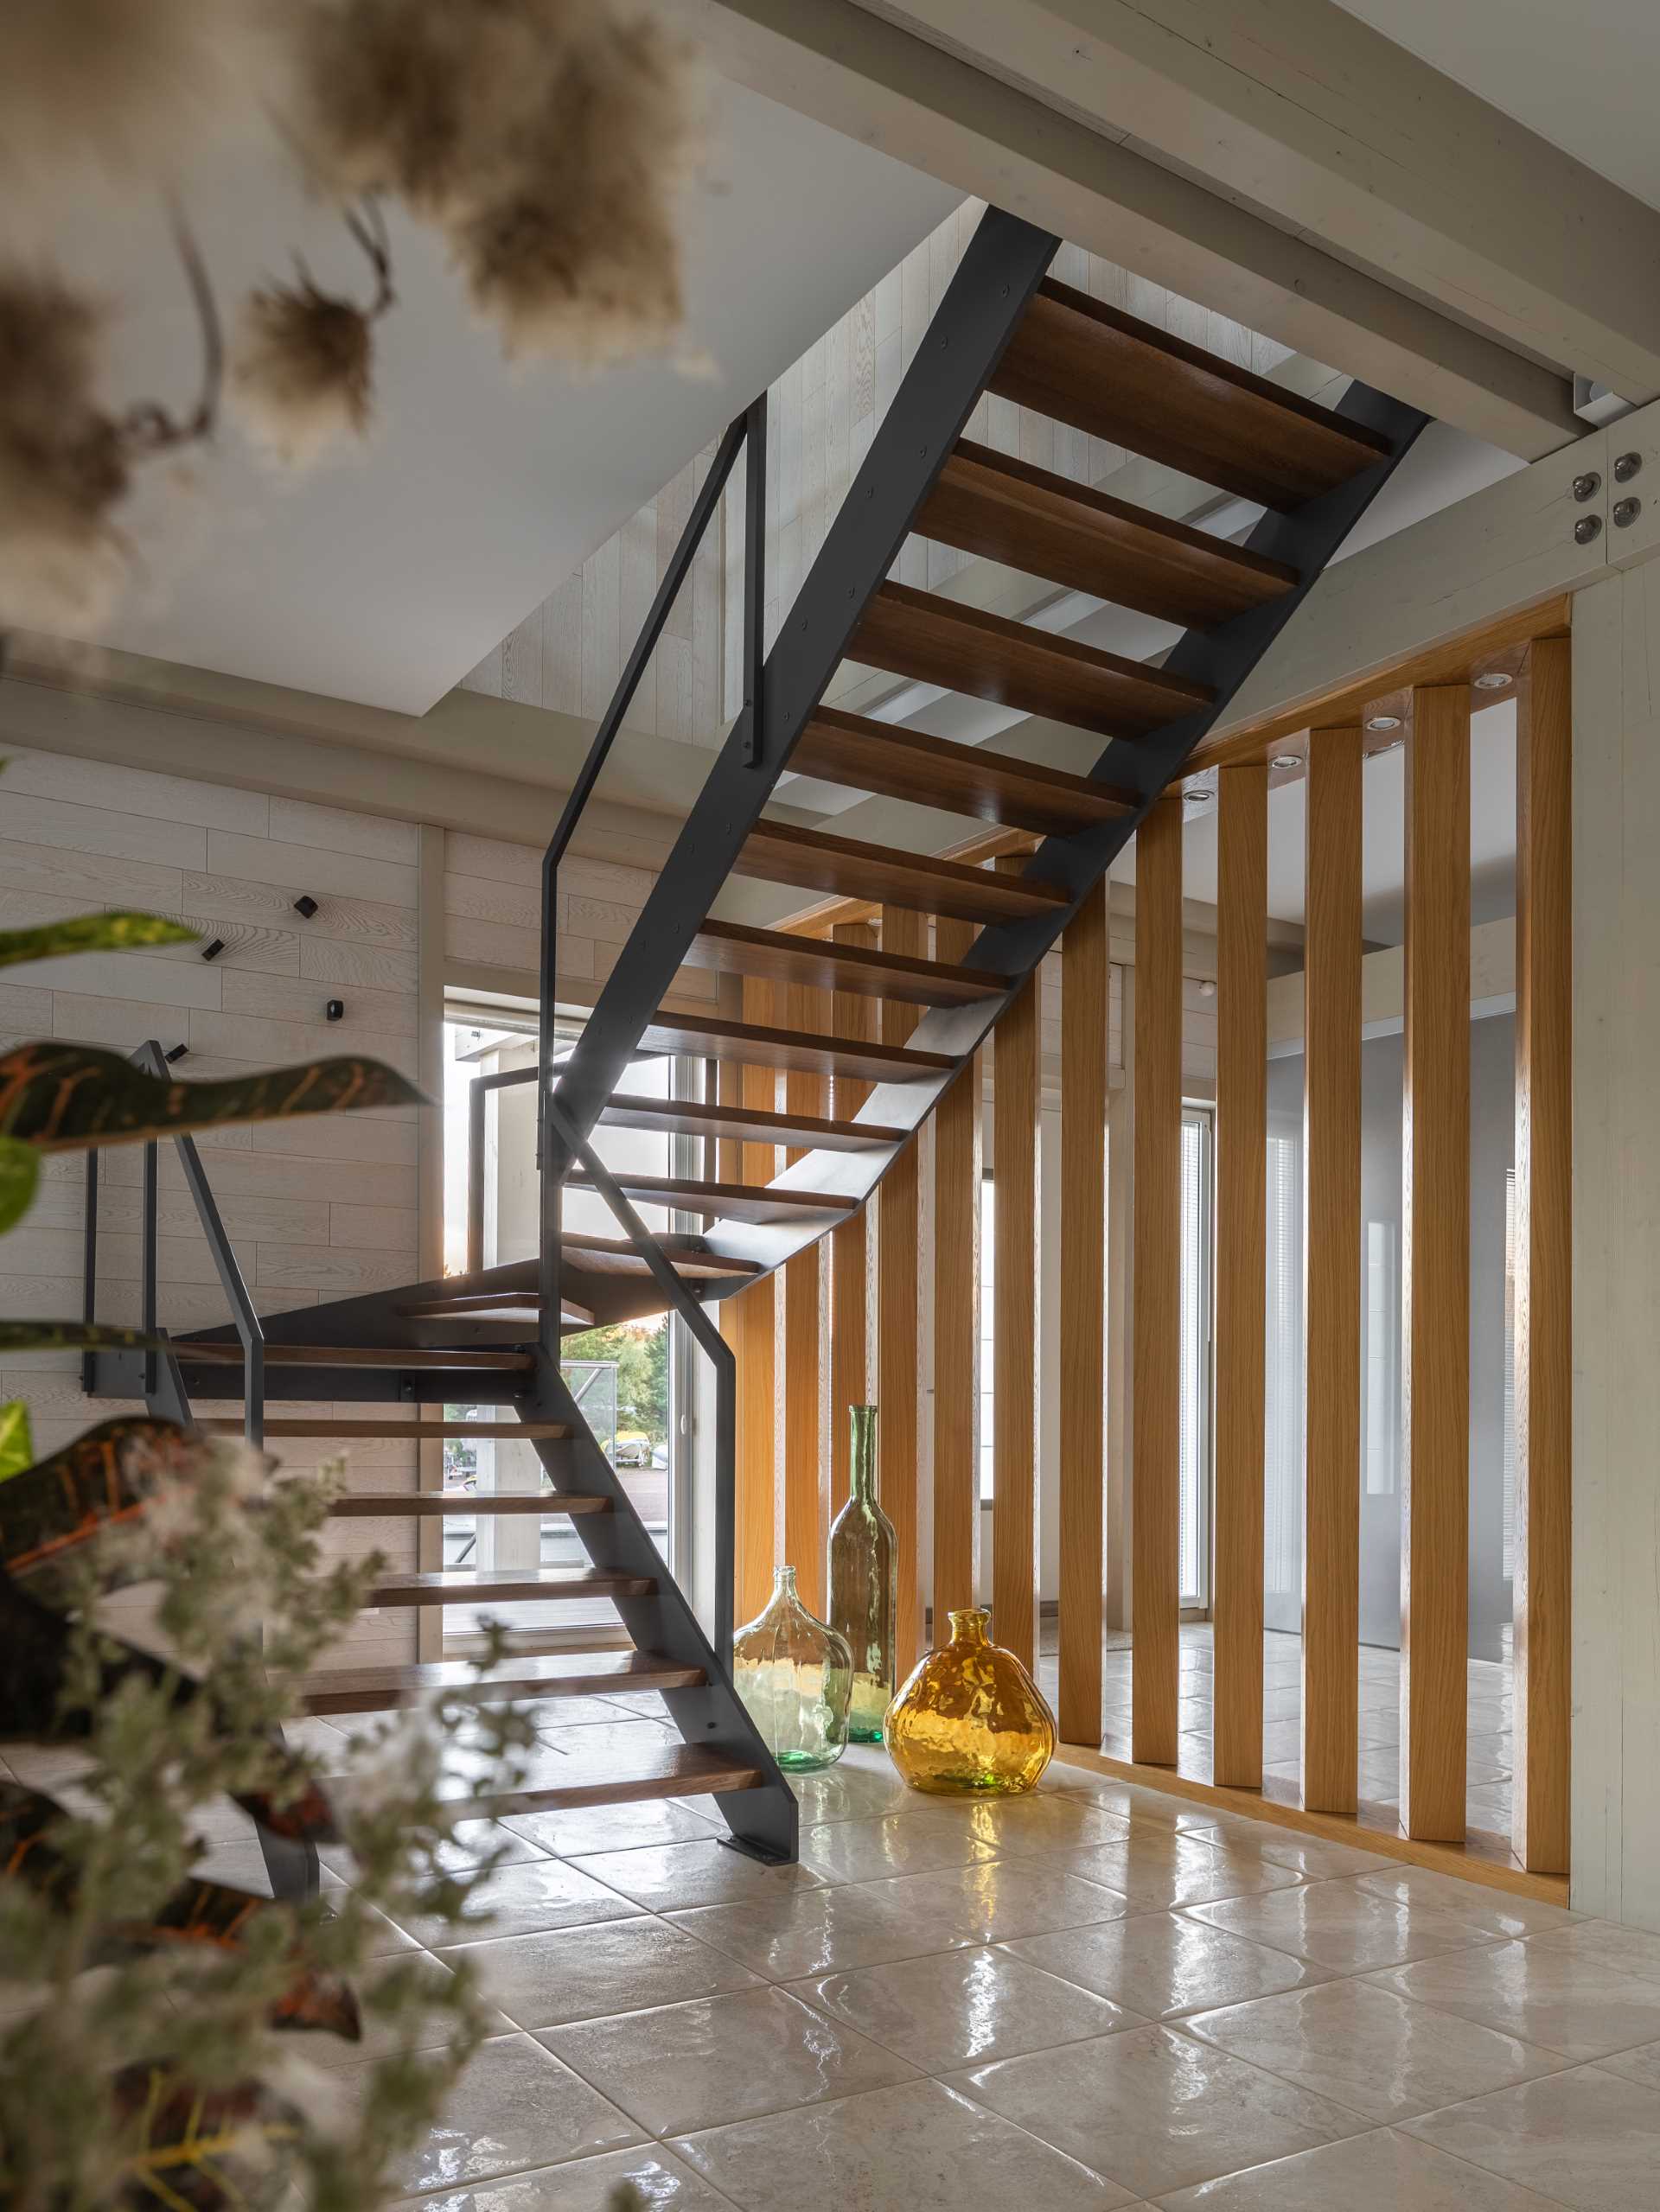 Steel and wood stairs connect the main floor with the upper floor of this home.